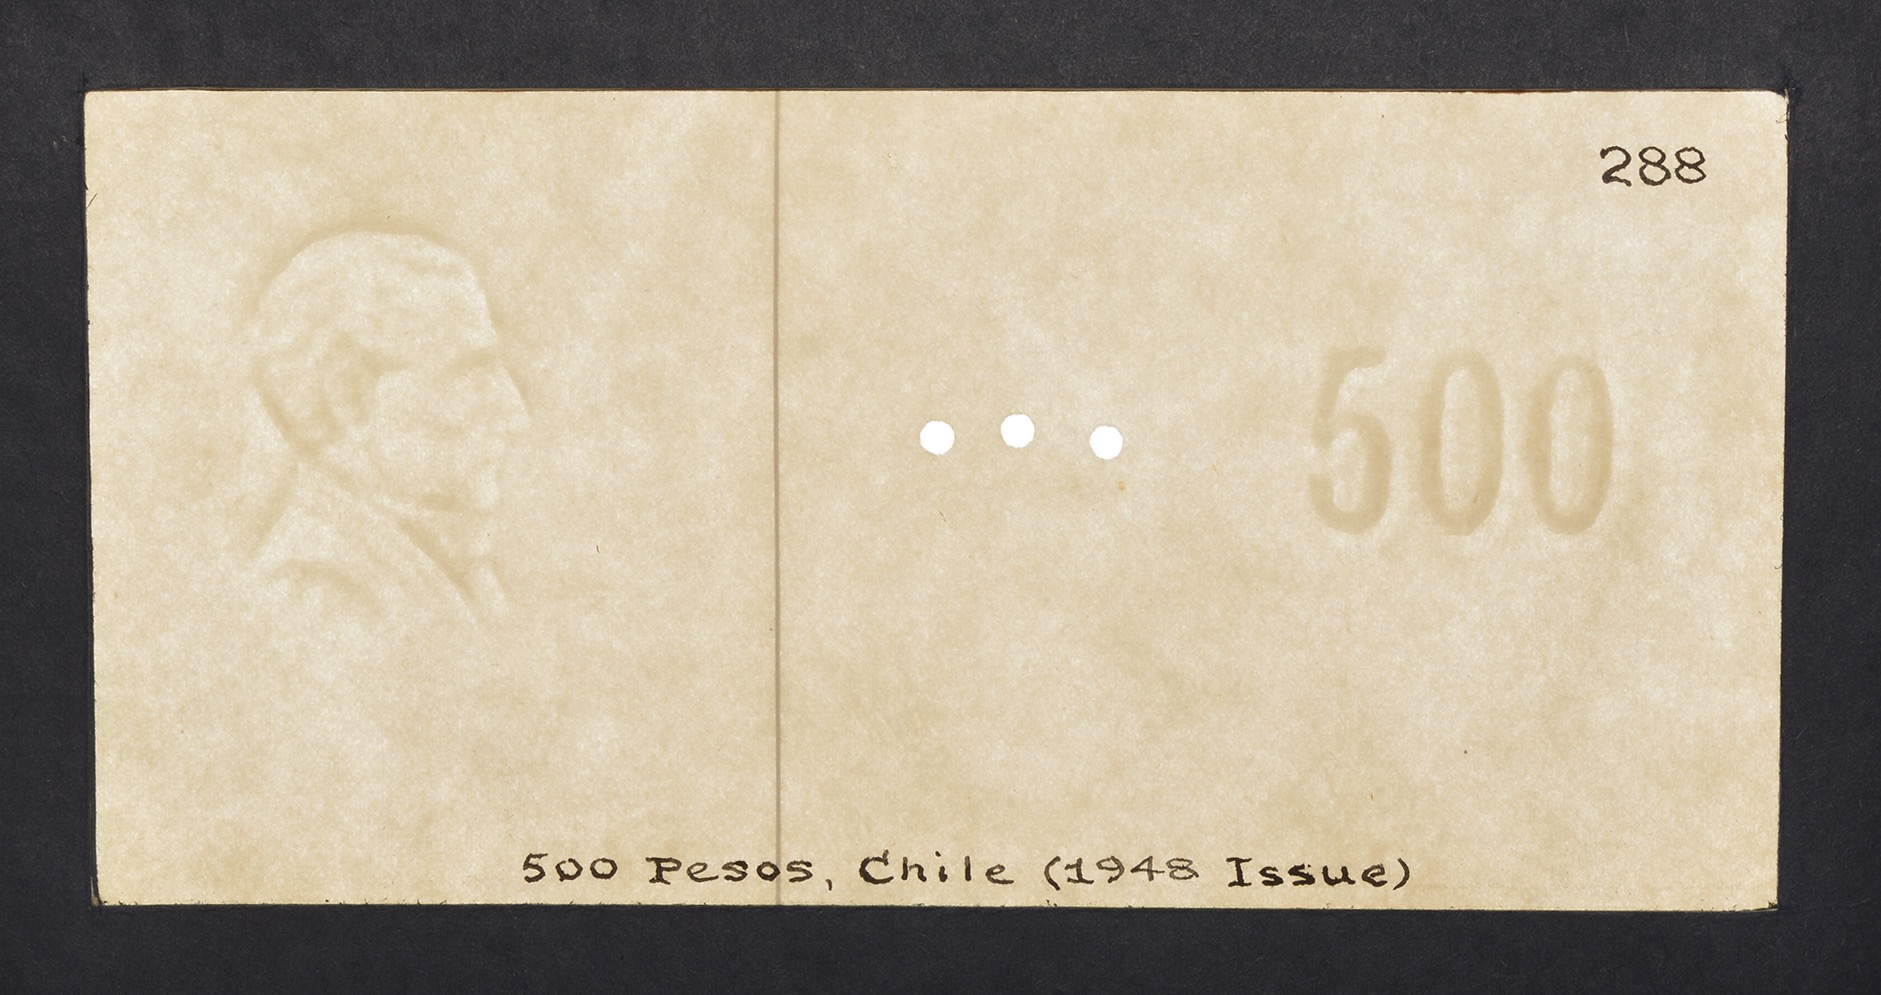 Banco Central de Chile, watermarked paper for the 500, 1000, 5000, and 10000 Pesos, issue... - Image 2 of 5